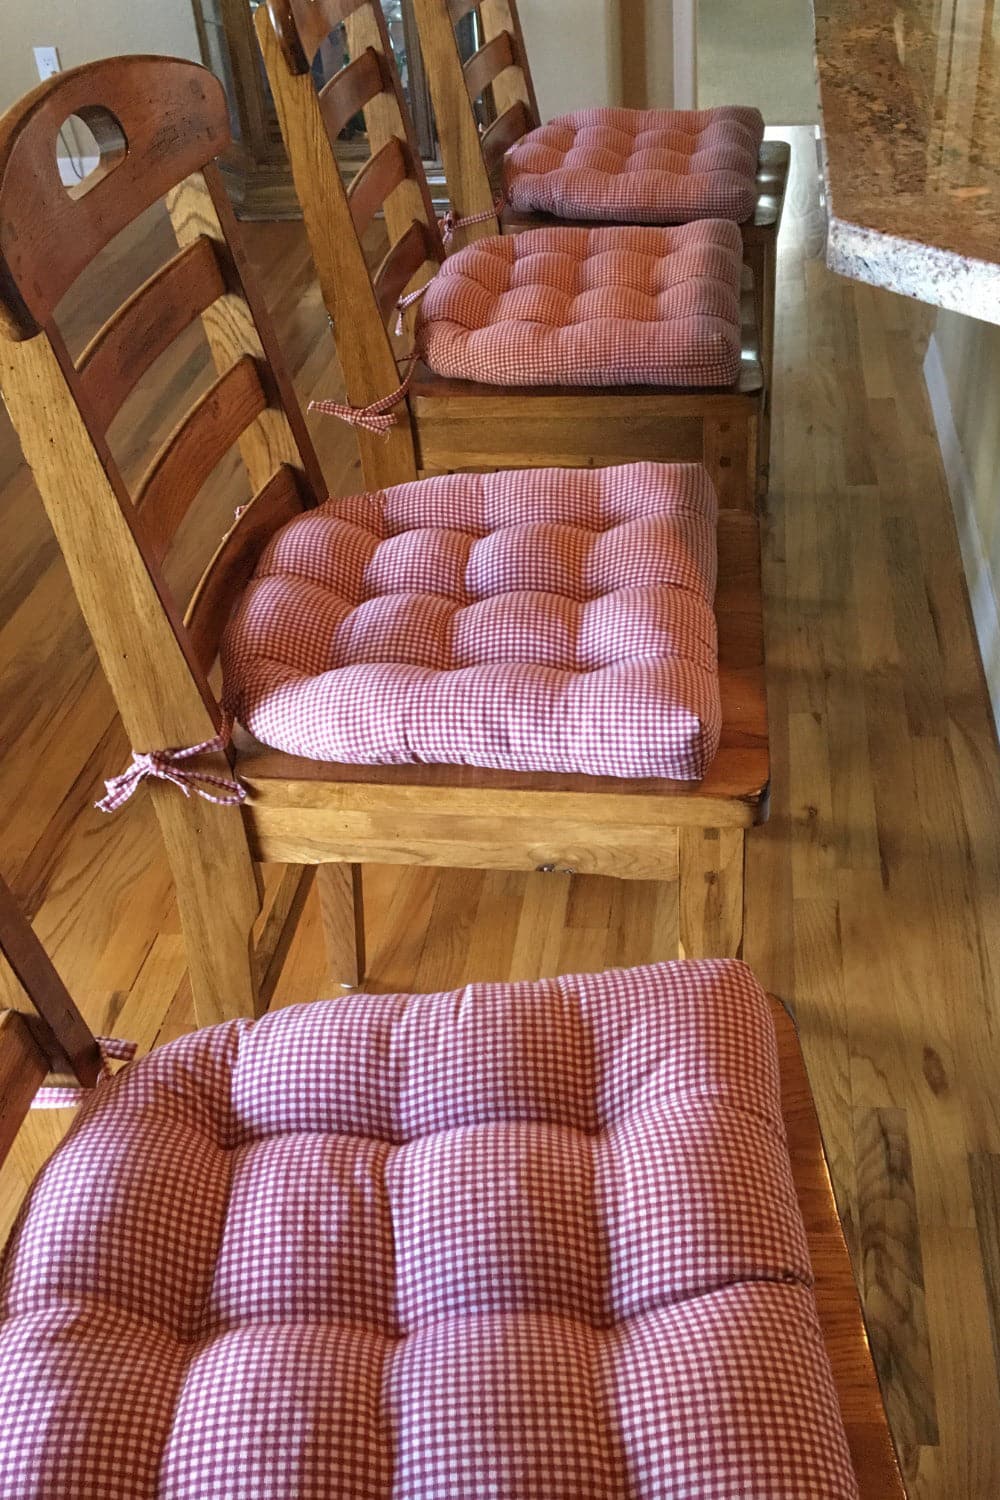 Madrid Red Gingham Dining Chair Pads - Latex Foam Fill, Reversible